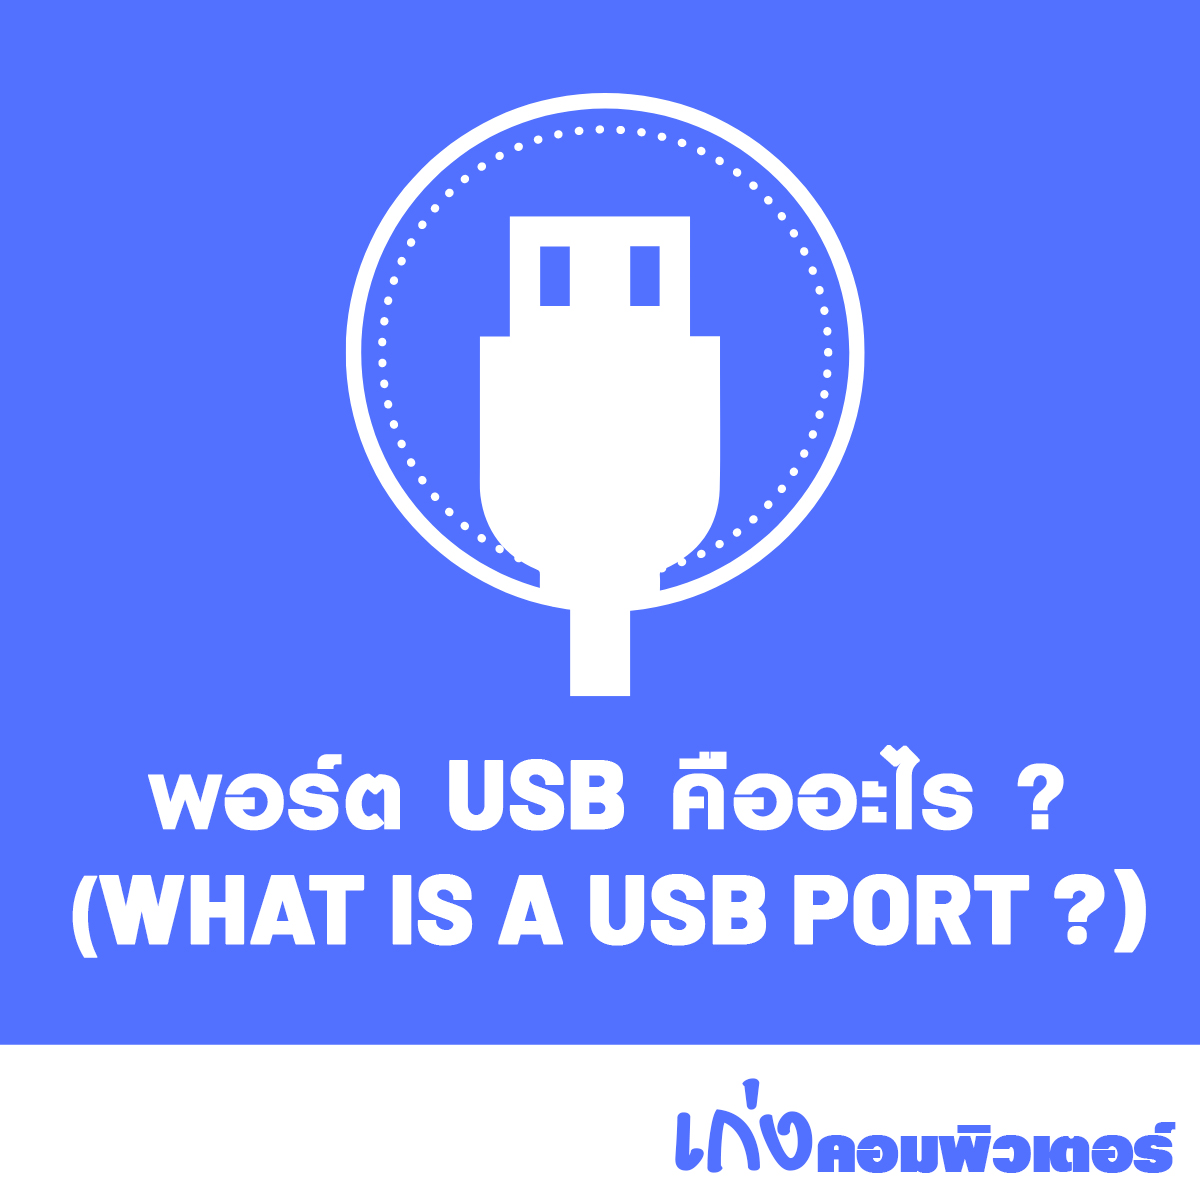 What is a USB port